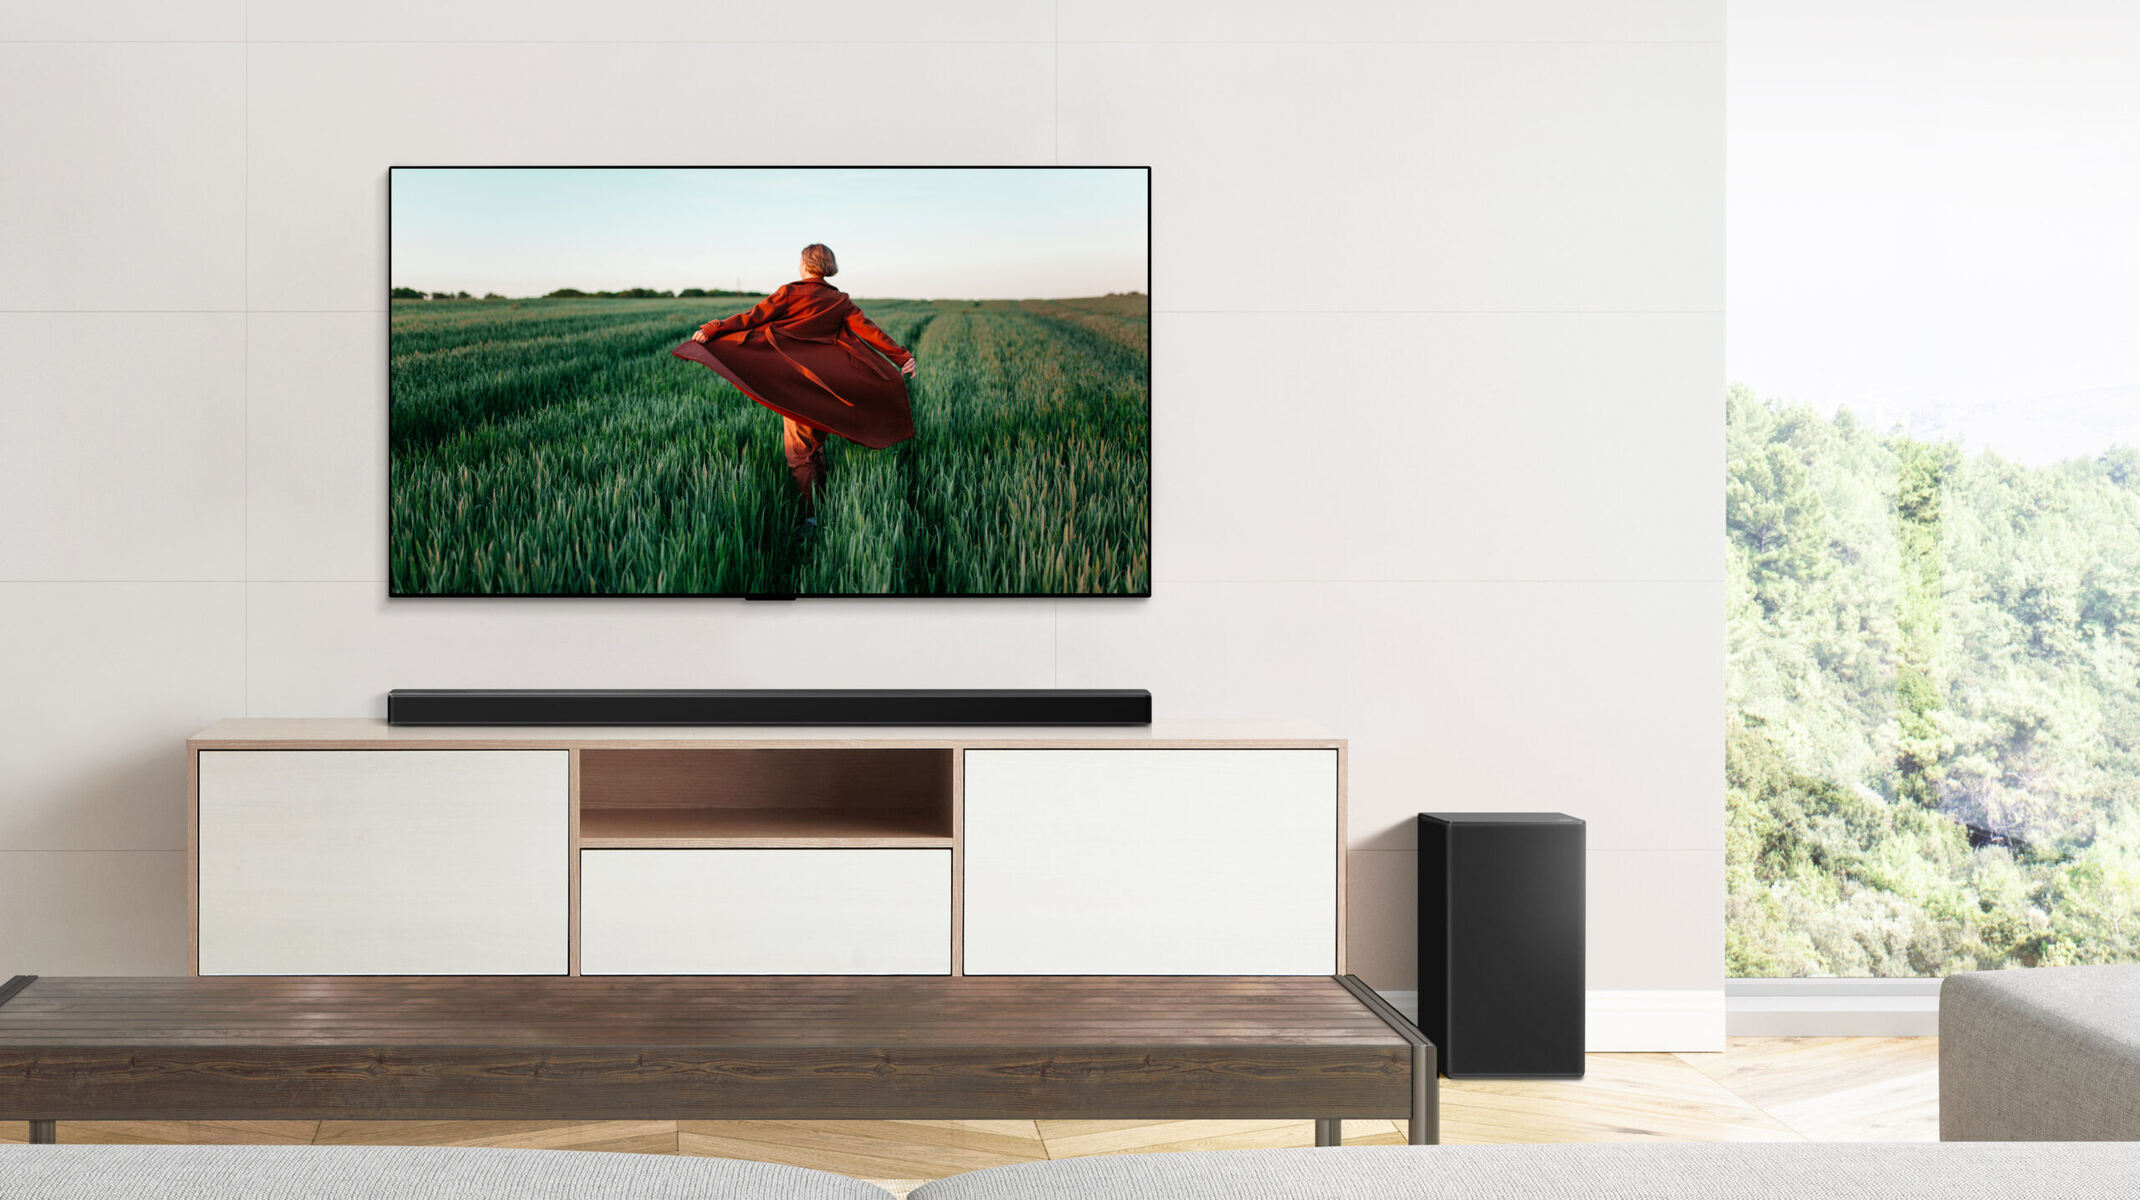 How To Connect An LG TV To A Soundbar